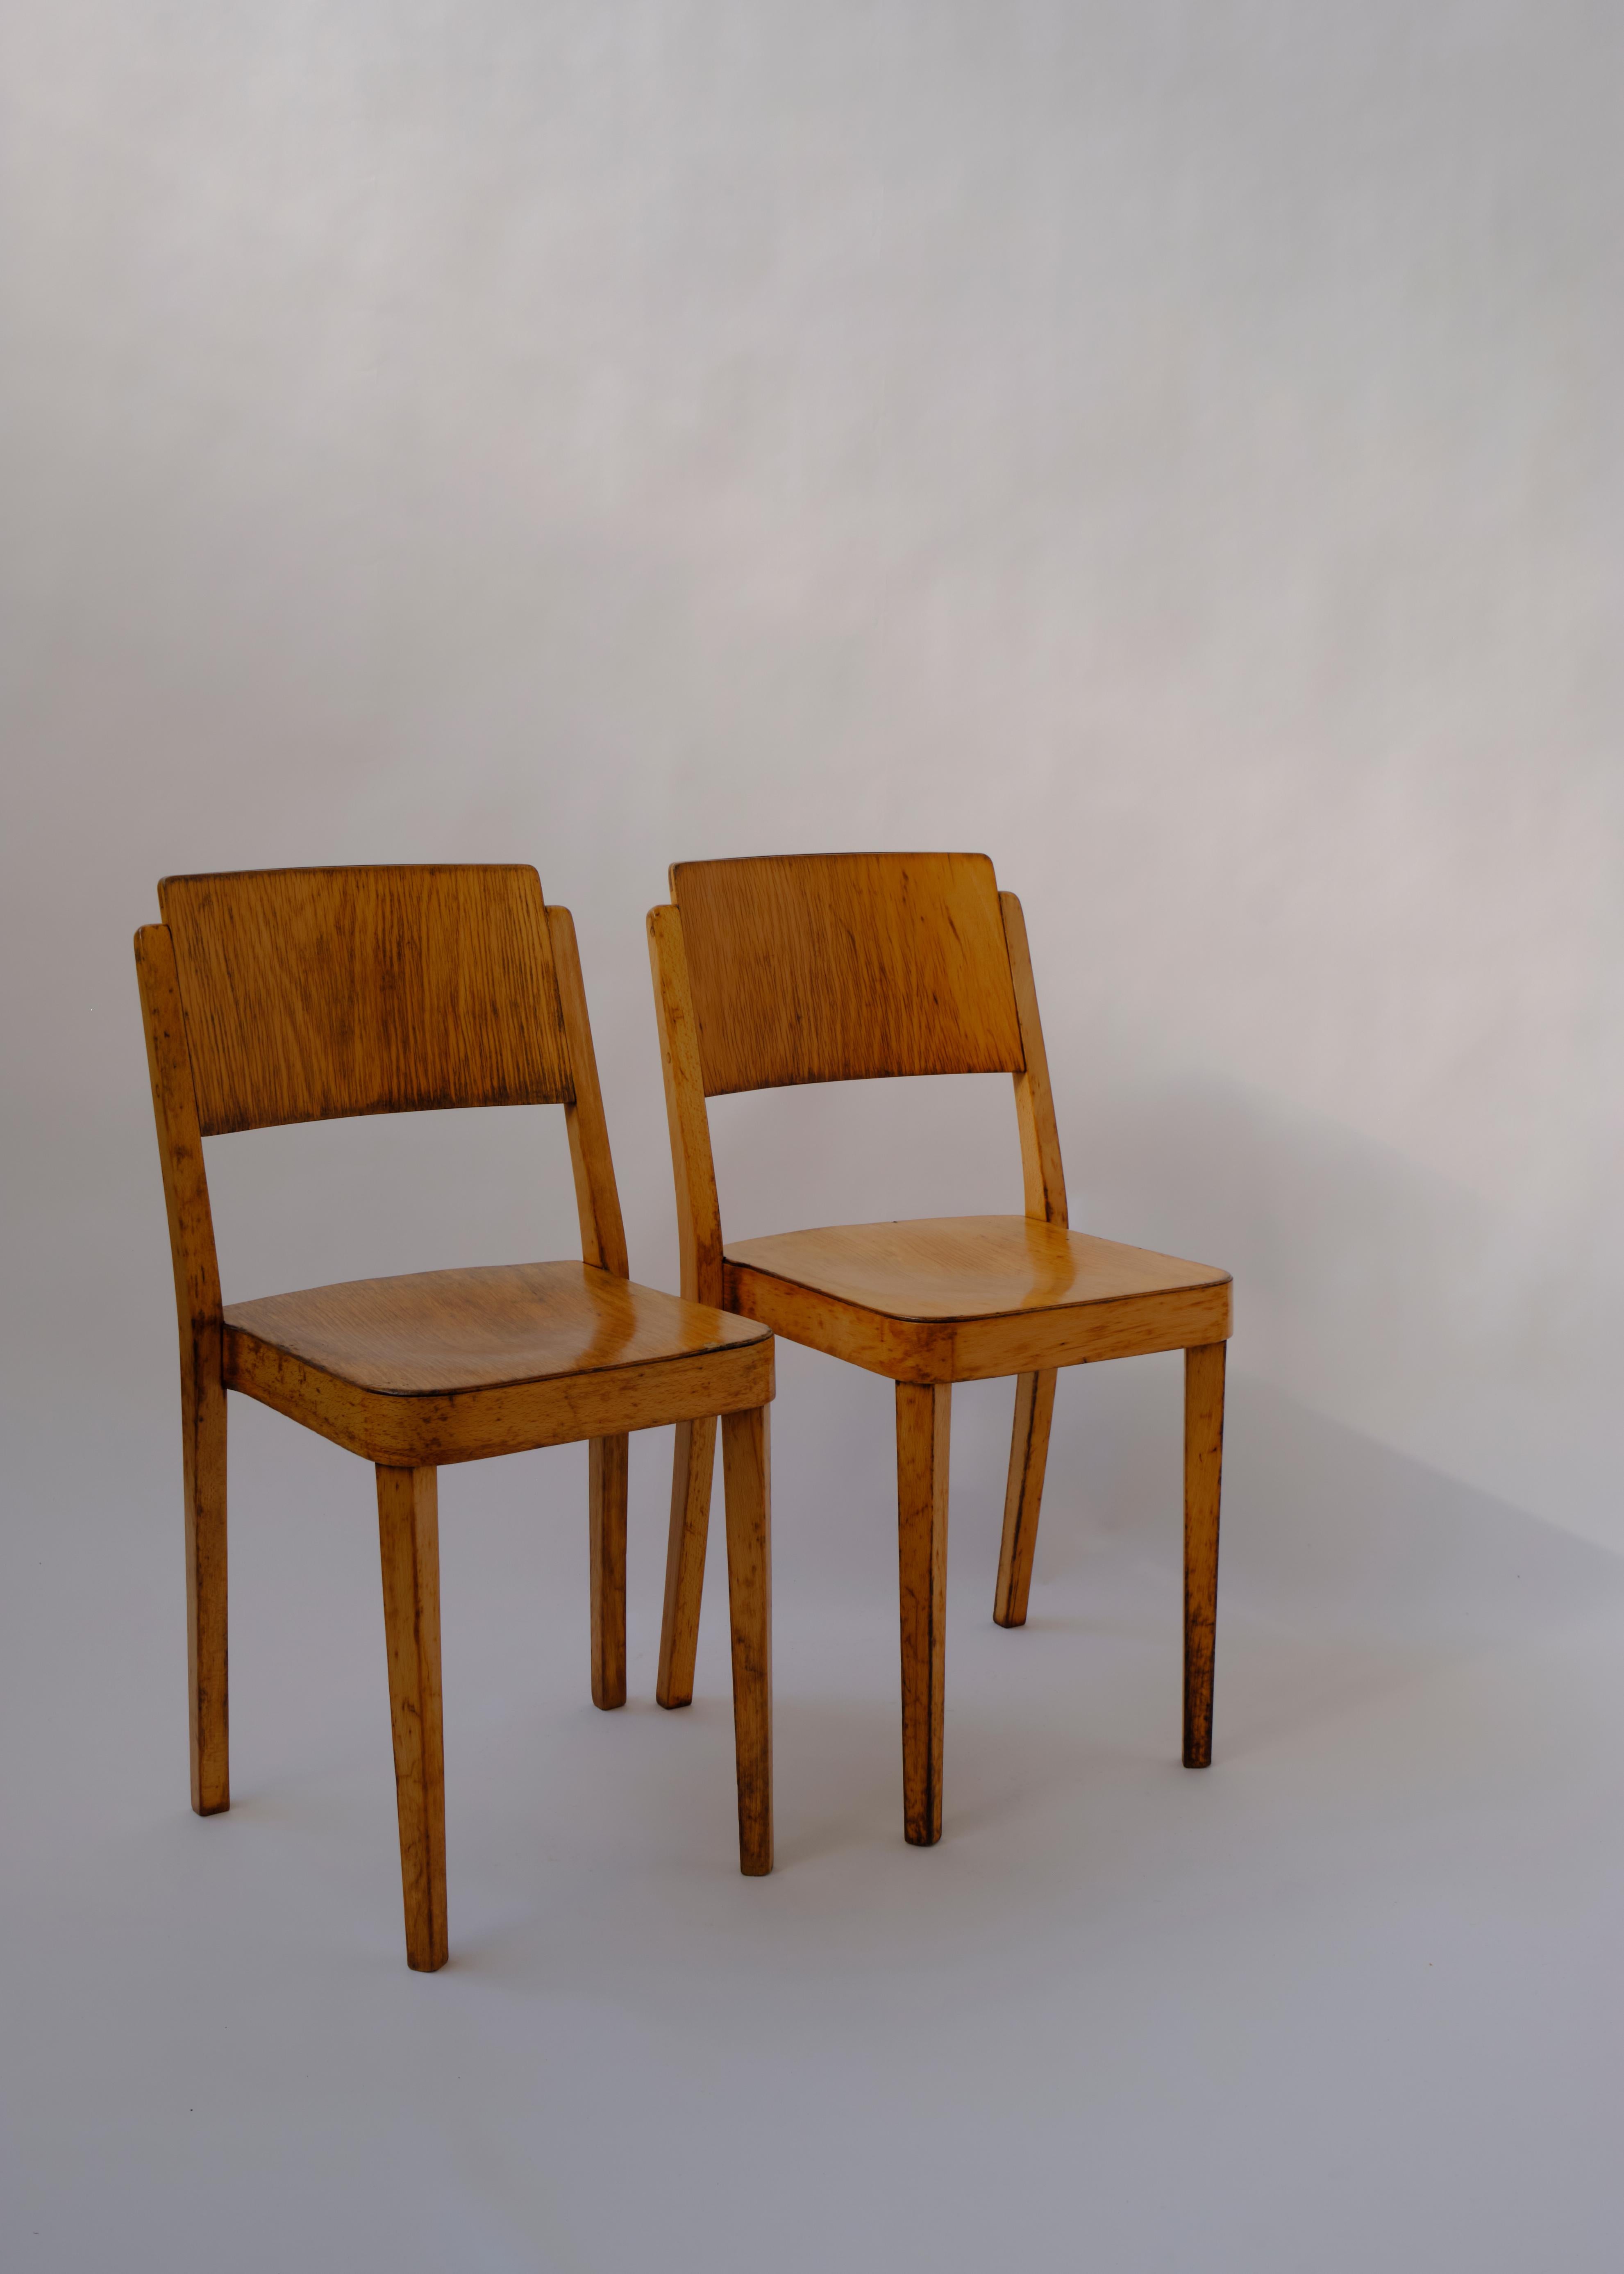 Pair of Stackable Model A 1250 Montana Chairs, by Thonet, 1930 For Sale 2